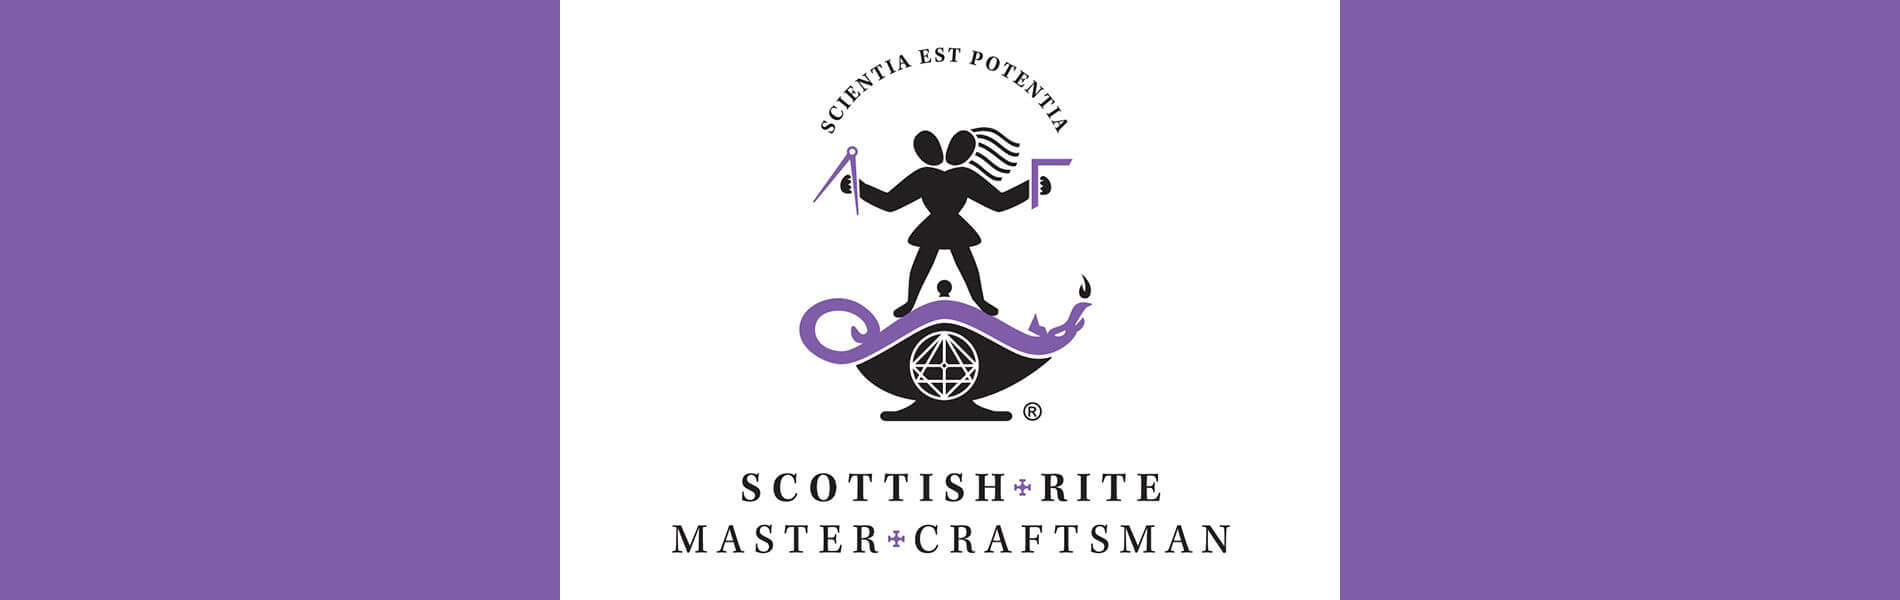 Scottish Rite Master Craftsman Now Available Online!